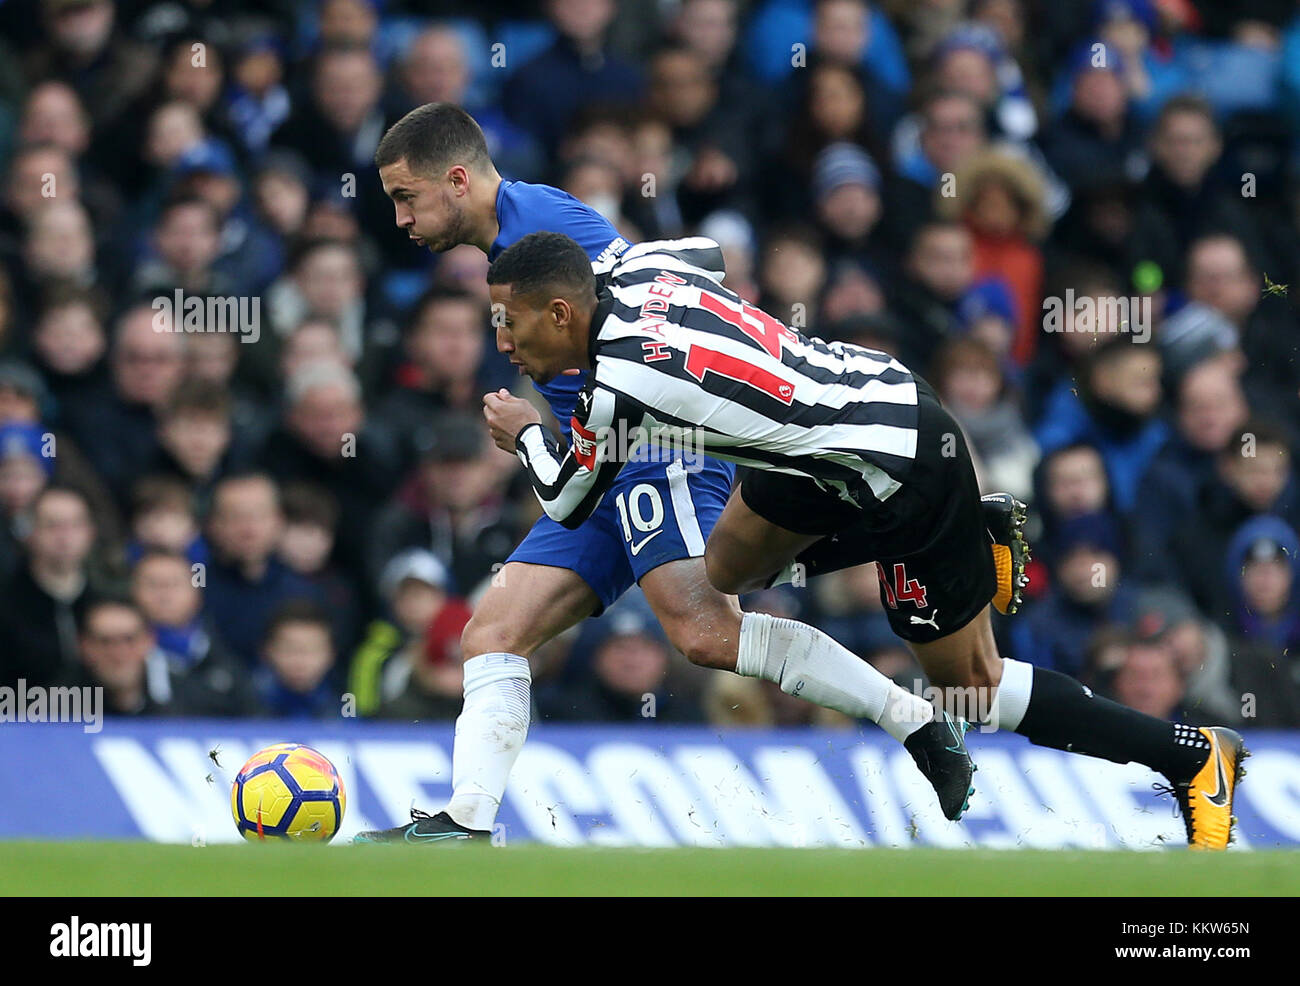 Chelsea's Eden Hazard (left) and Newcastle United's Isaac Hayden battle for the ball during the Premier League match at Stamford Bridge, London. PRESS ASSOCIATION Photo Picture date: Saturday December 2, 2017. See PA story SOCCER London. Photo credit should read: Steven Paston/PA Wire. RESTRICTIONS: No use with unauthorised audio, video, data, fixture lists, club/league logos or 'live' services. Online in-match use limited to 75 images, no video emulation. No use in betting, games or single club/league/player publications. Stock Photo